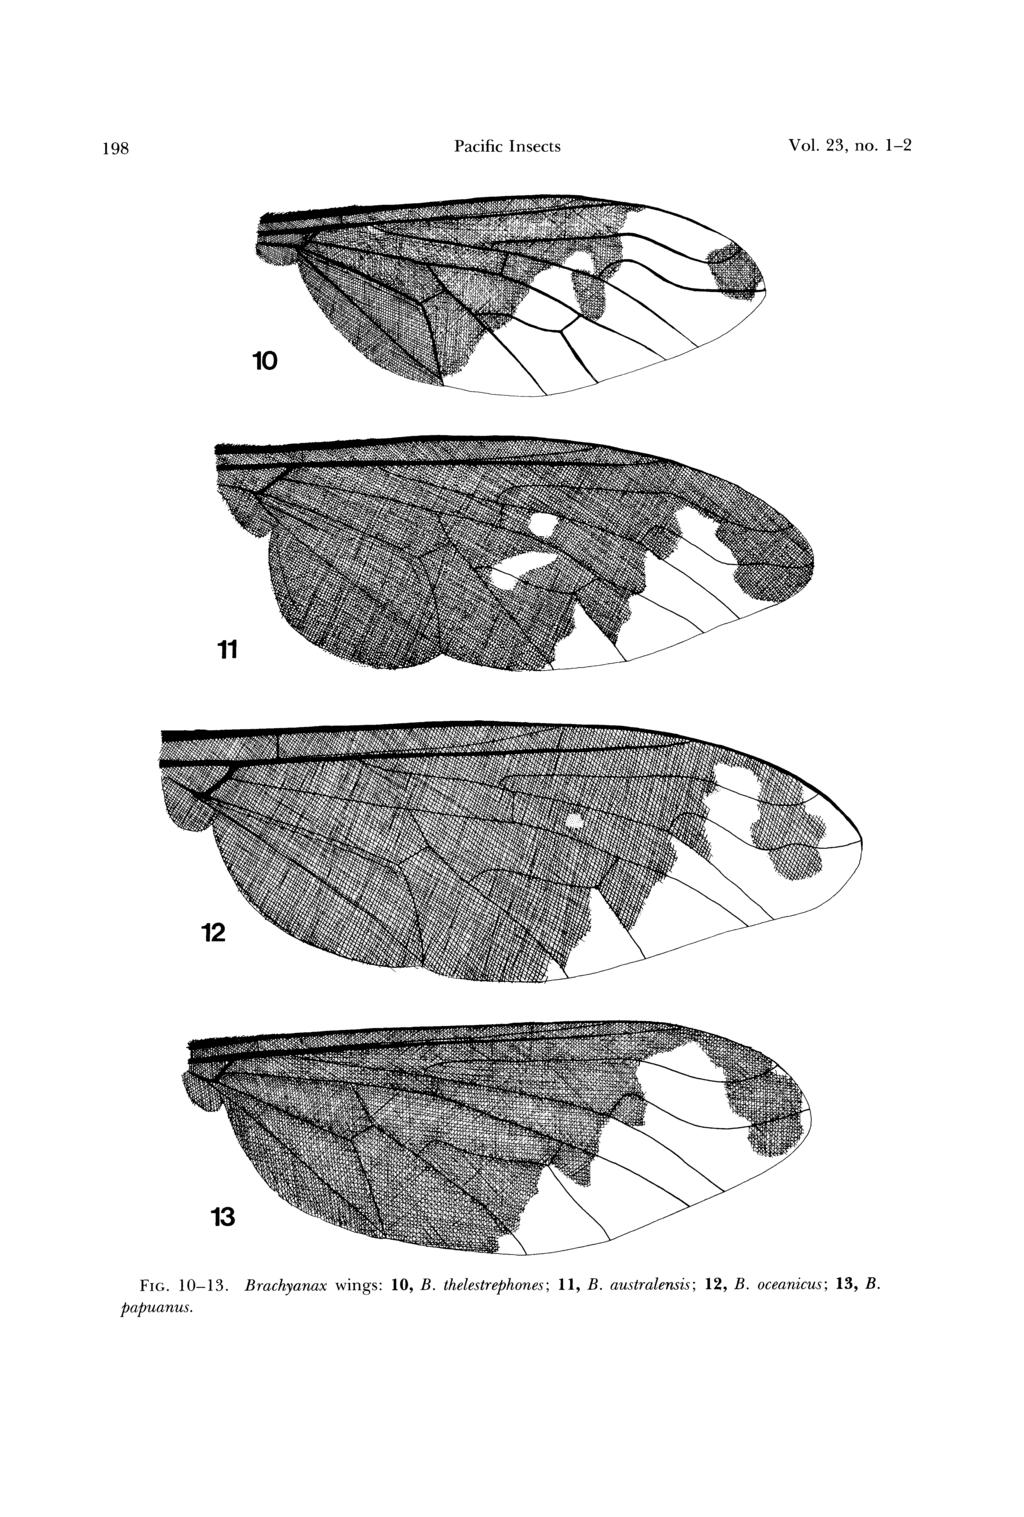 198 Pacific Insects Vol. 23, no. 1-2 FIG. 10-13. Brachyanax wings: 10, B.